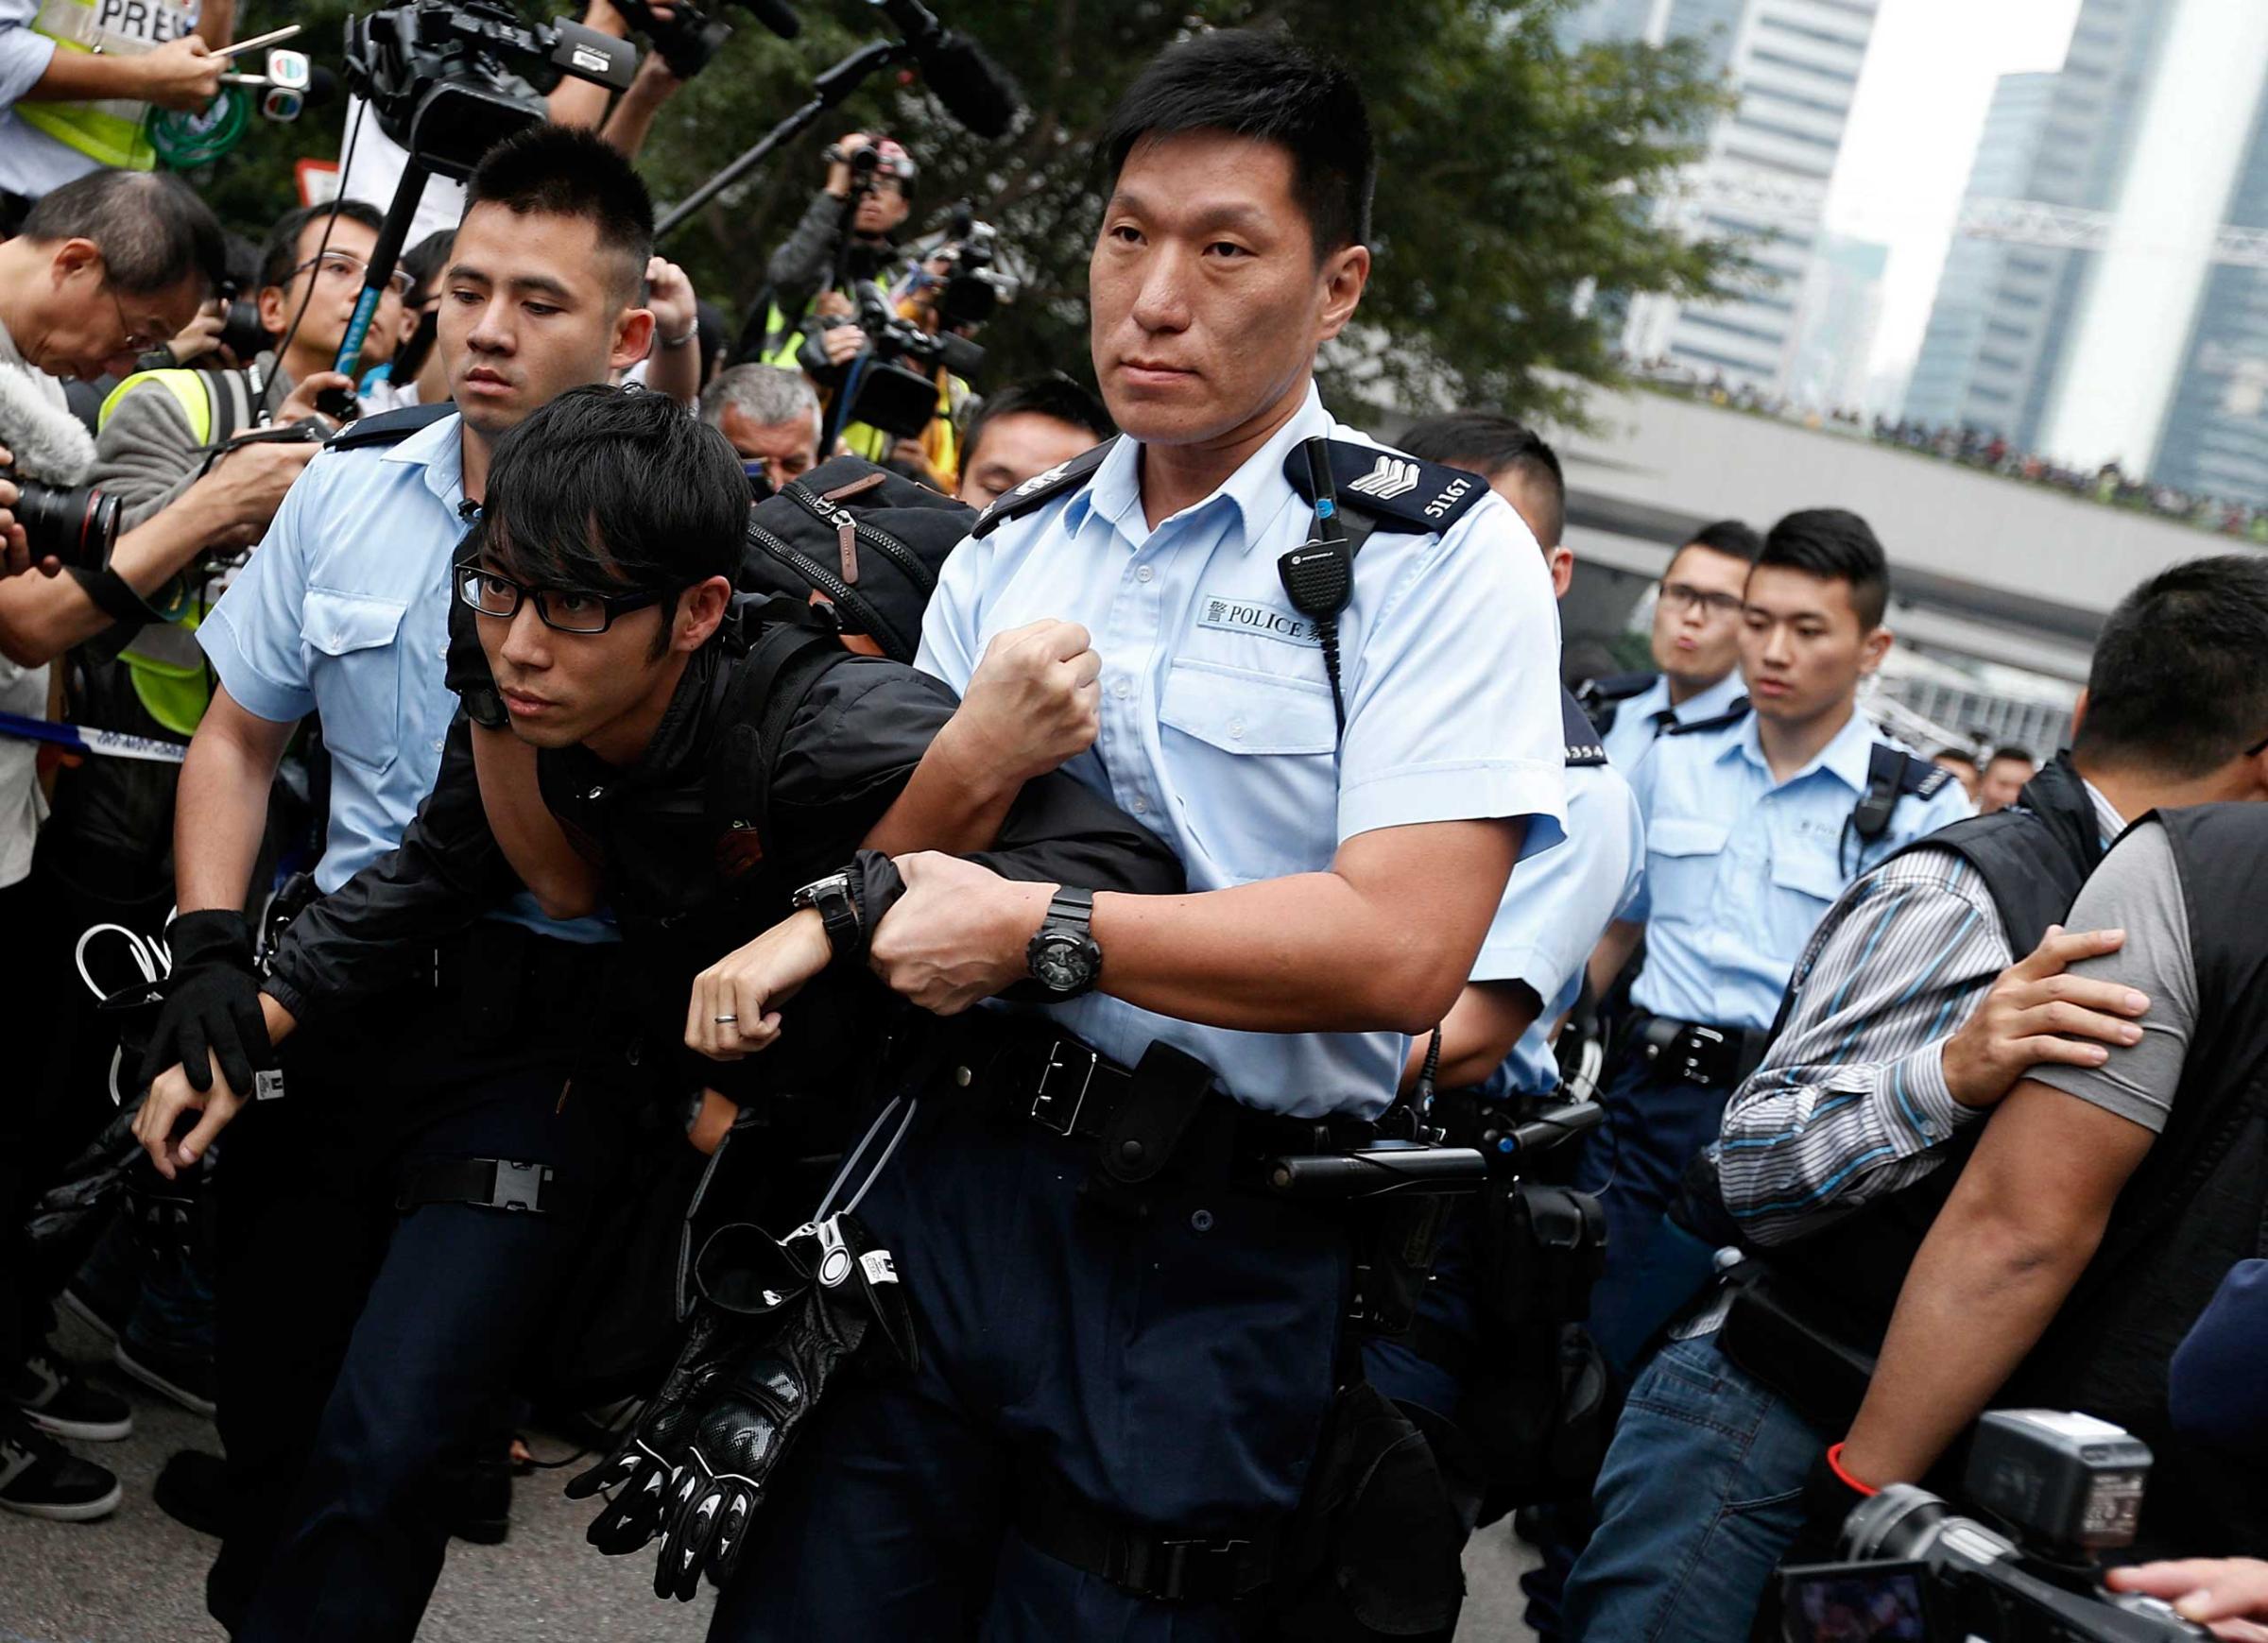 A demonstrator is taken away by policemen, at an area previously blocked by pro-democracy supporters, outside the government headquarters in Hong Kong, Dec. 11, 2014.